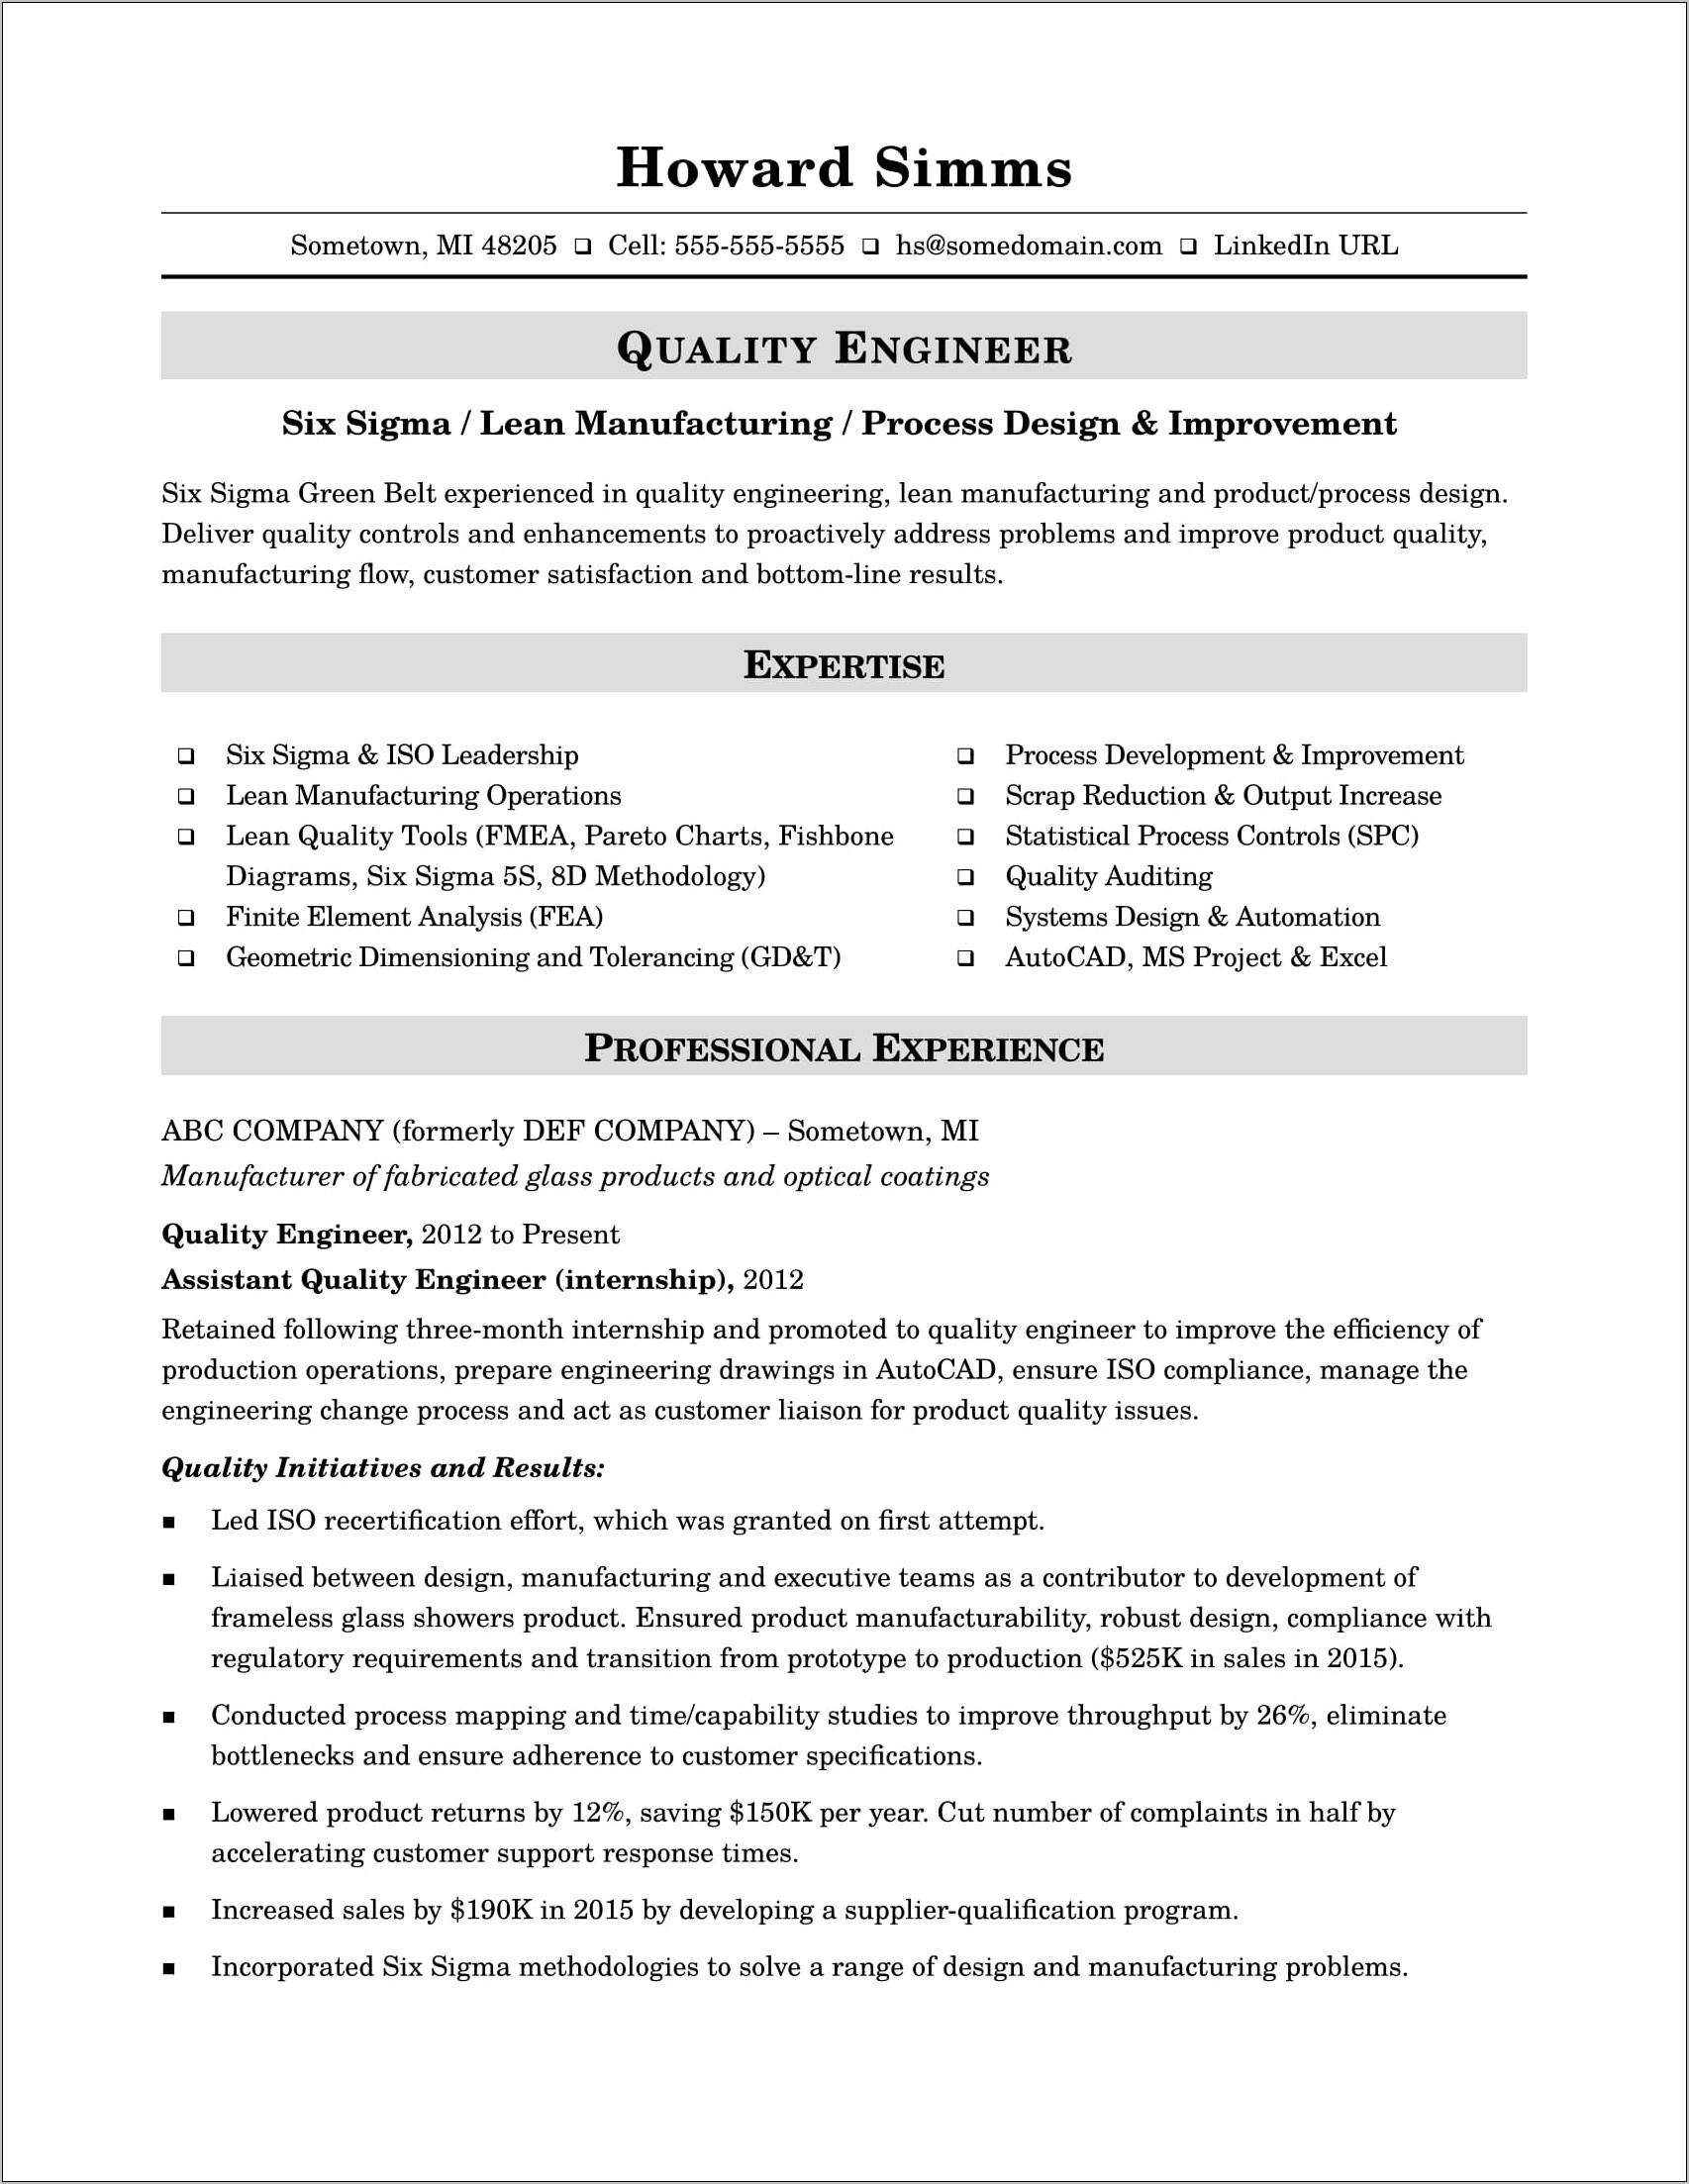 Sample Resume For Experienced Production Engineer Pdf